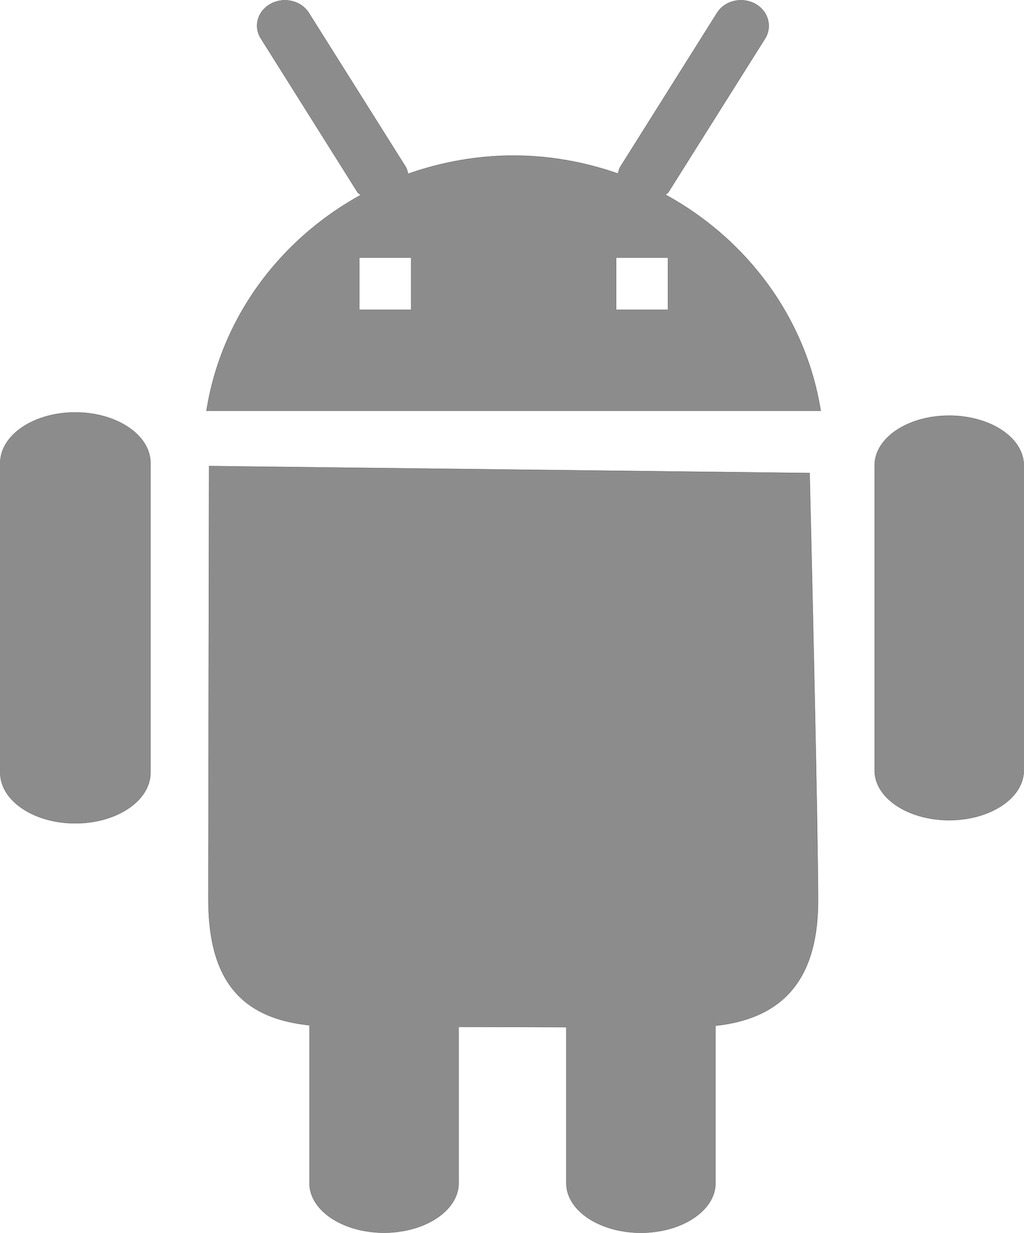  android sax解析xml文件（二）